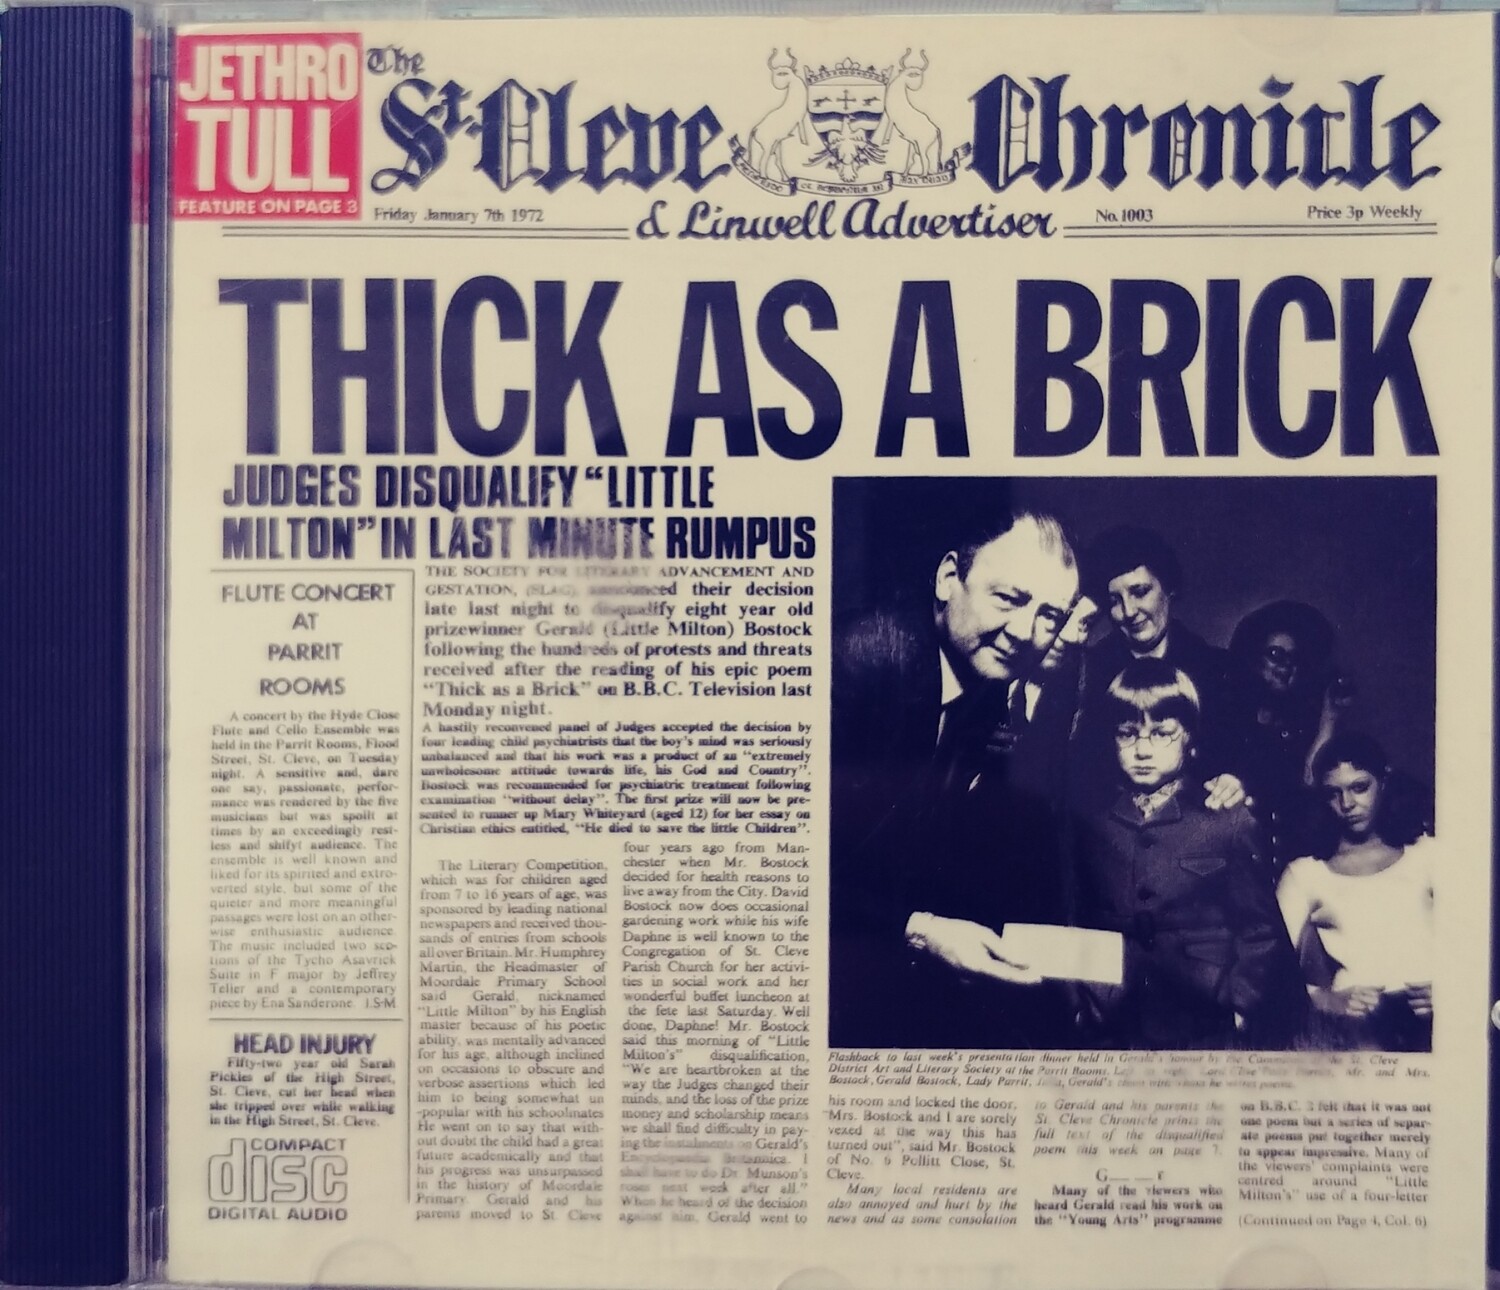 Jethro Tull - Thick as a brick (CD)